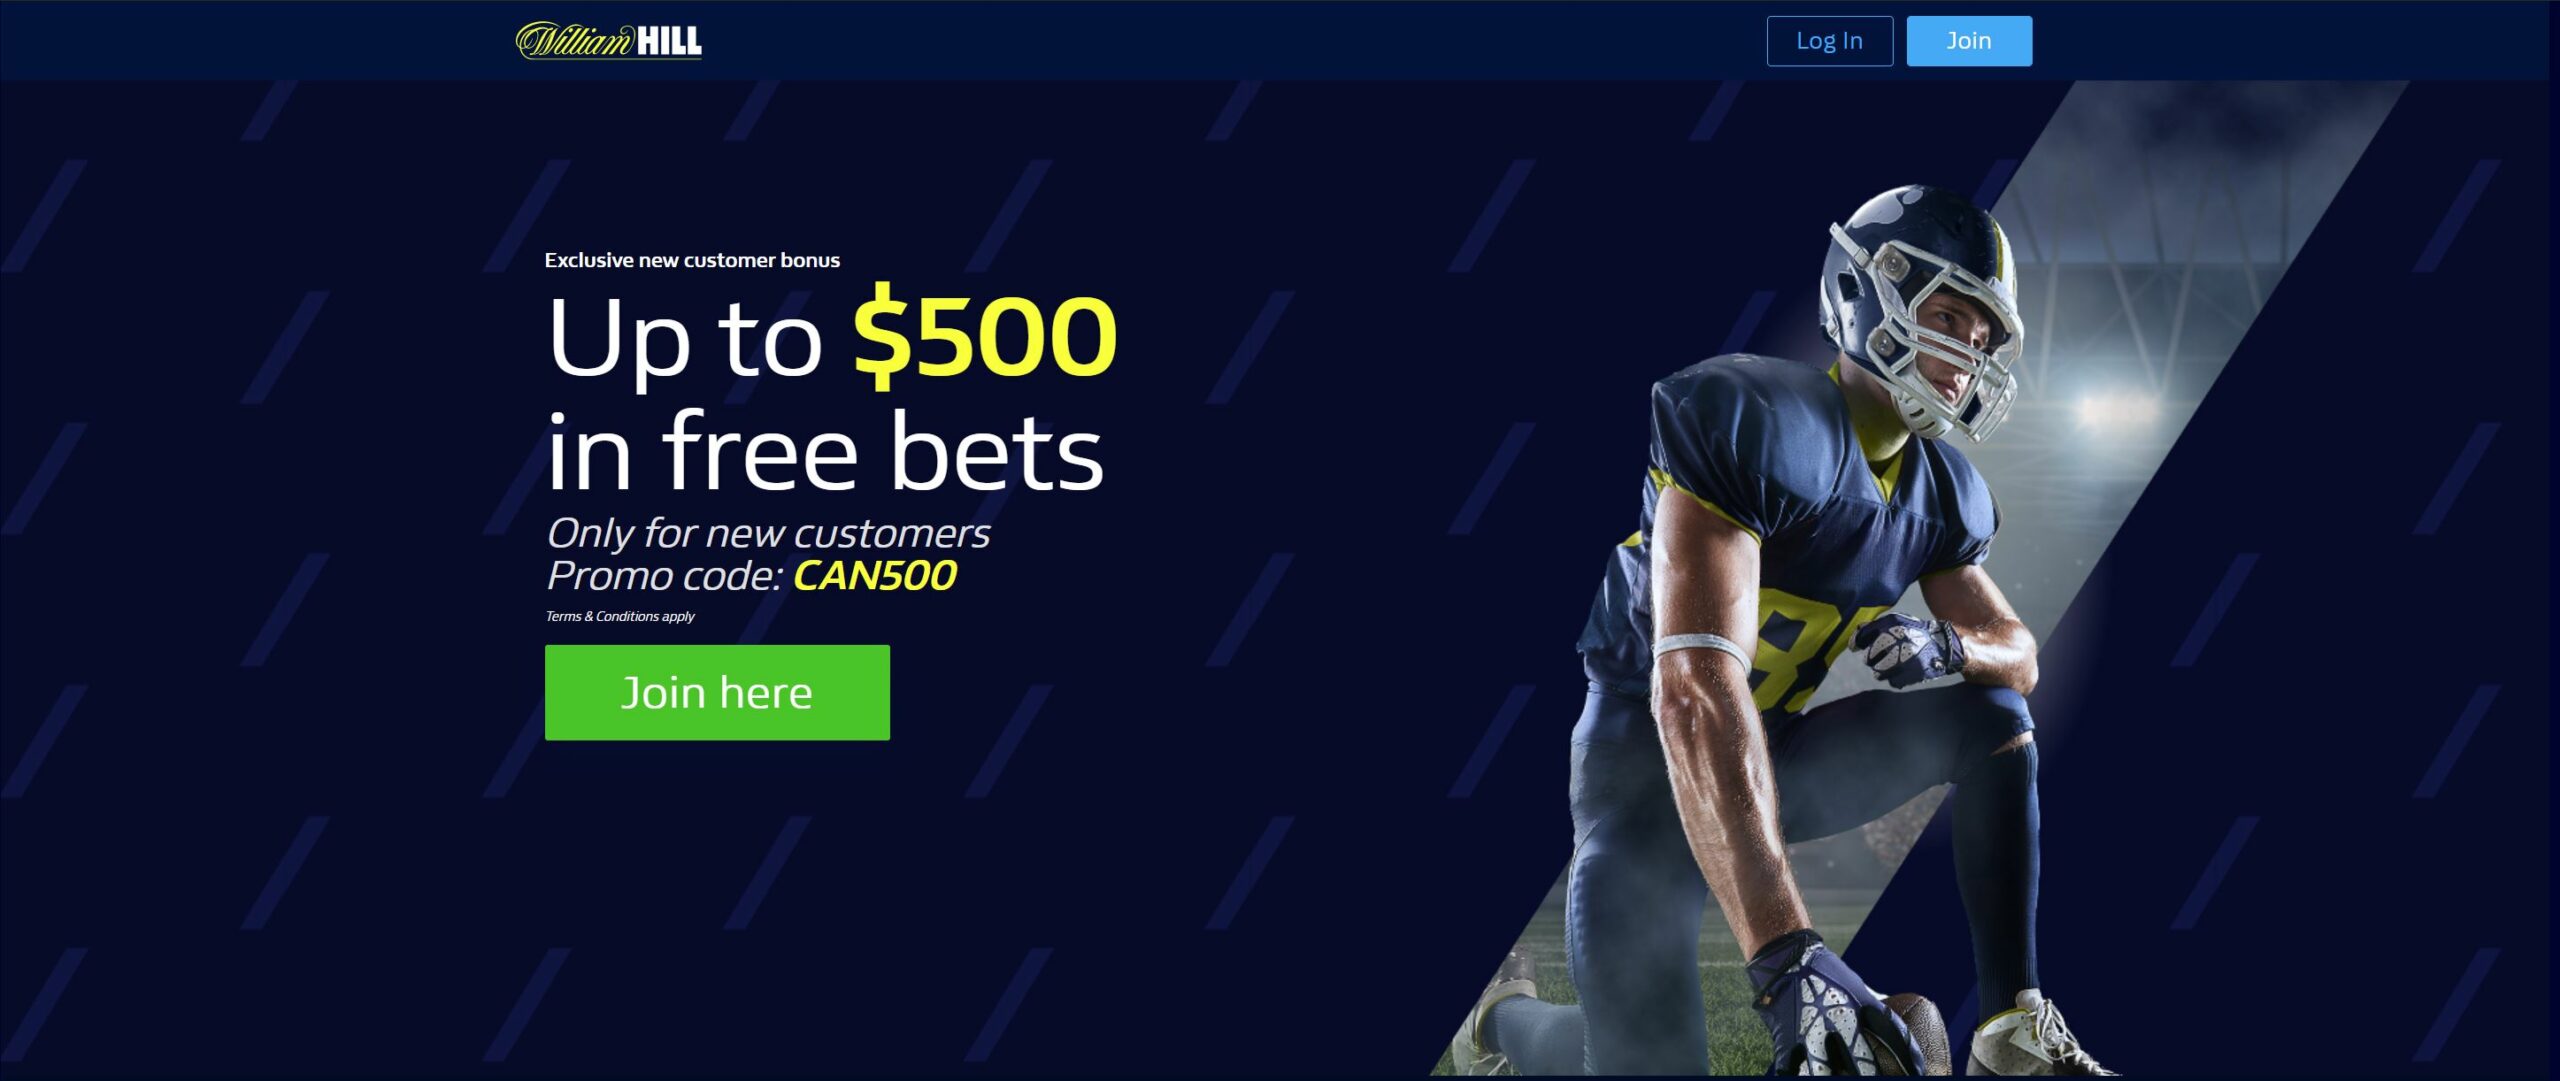 william hill welcome offer